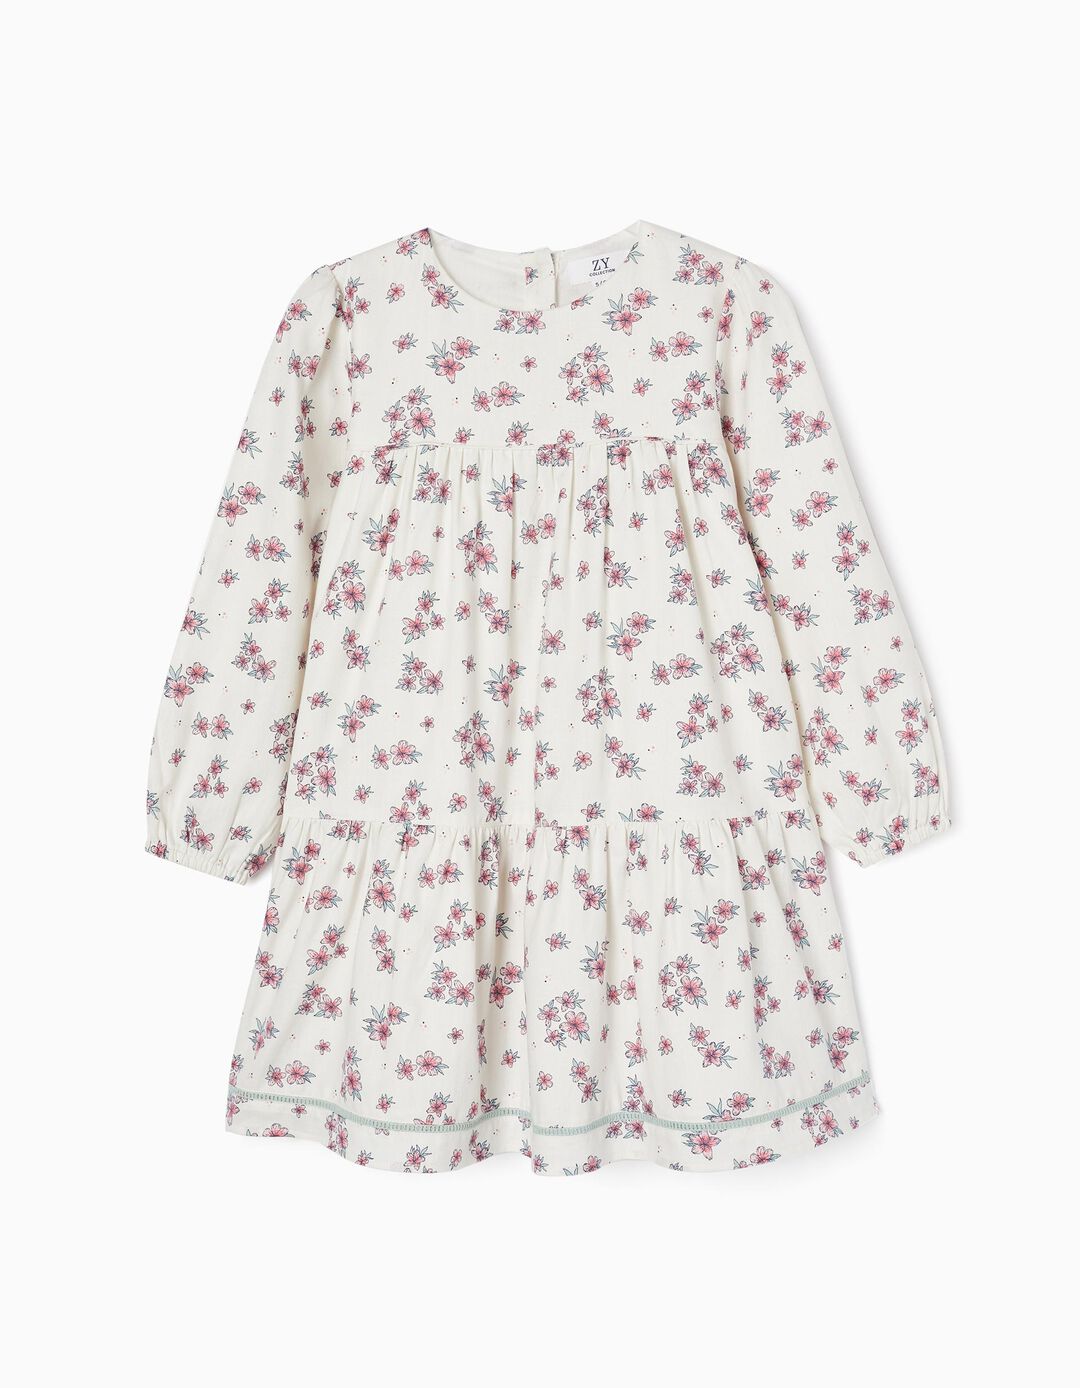 Cotton Dress with Floral Motif for Girls, White/Pink